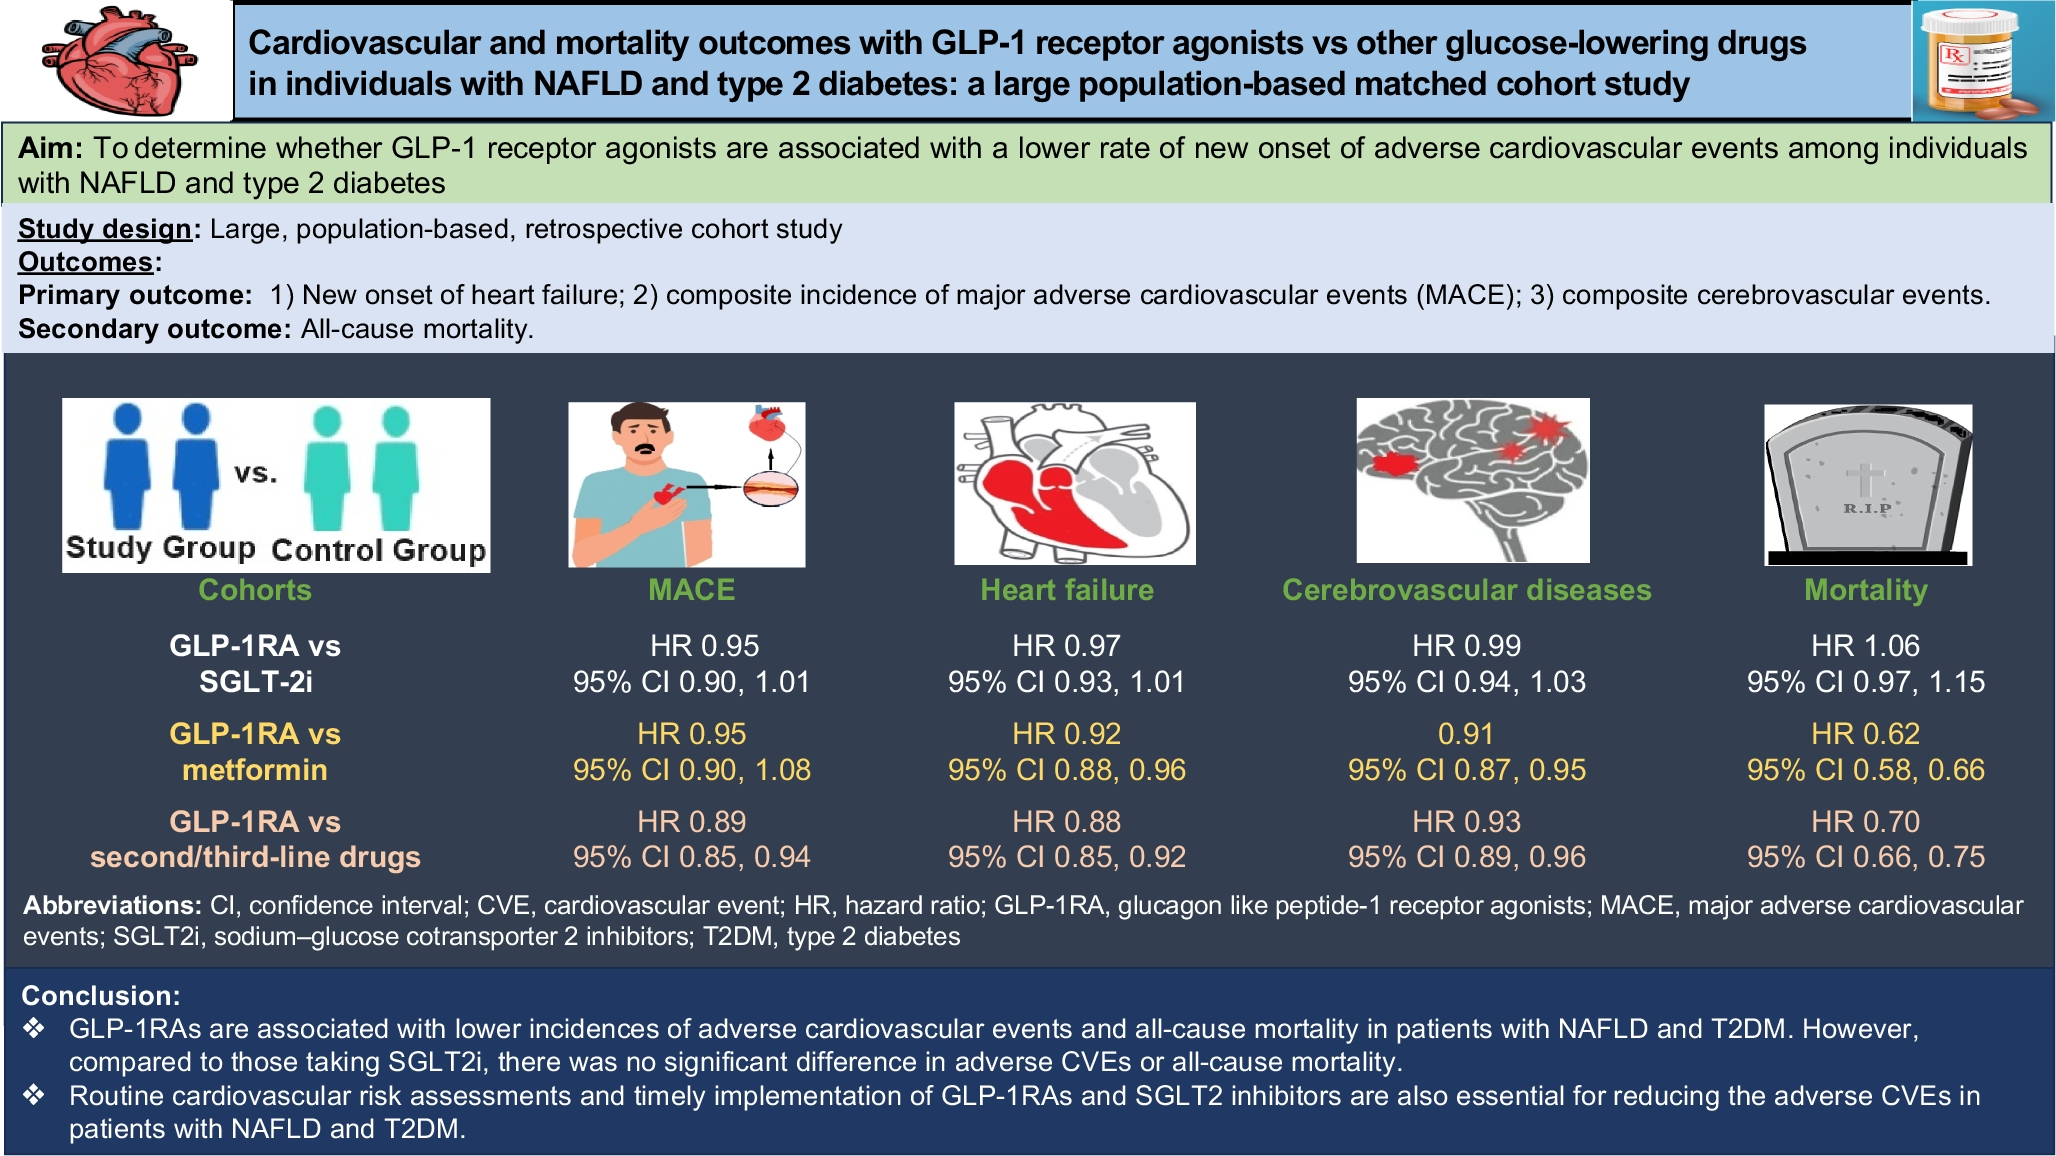 Cardiovascular and mortality outcomes with GLP-1 receptor agonists vs other glucose-lowering drugs in individuals with NAFLD and type 2 diabetes: a large population-based matched cohort study